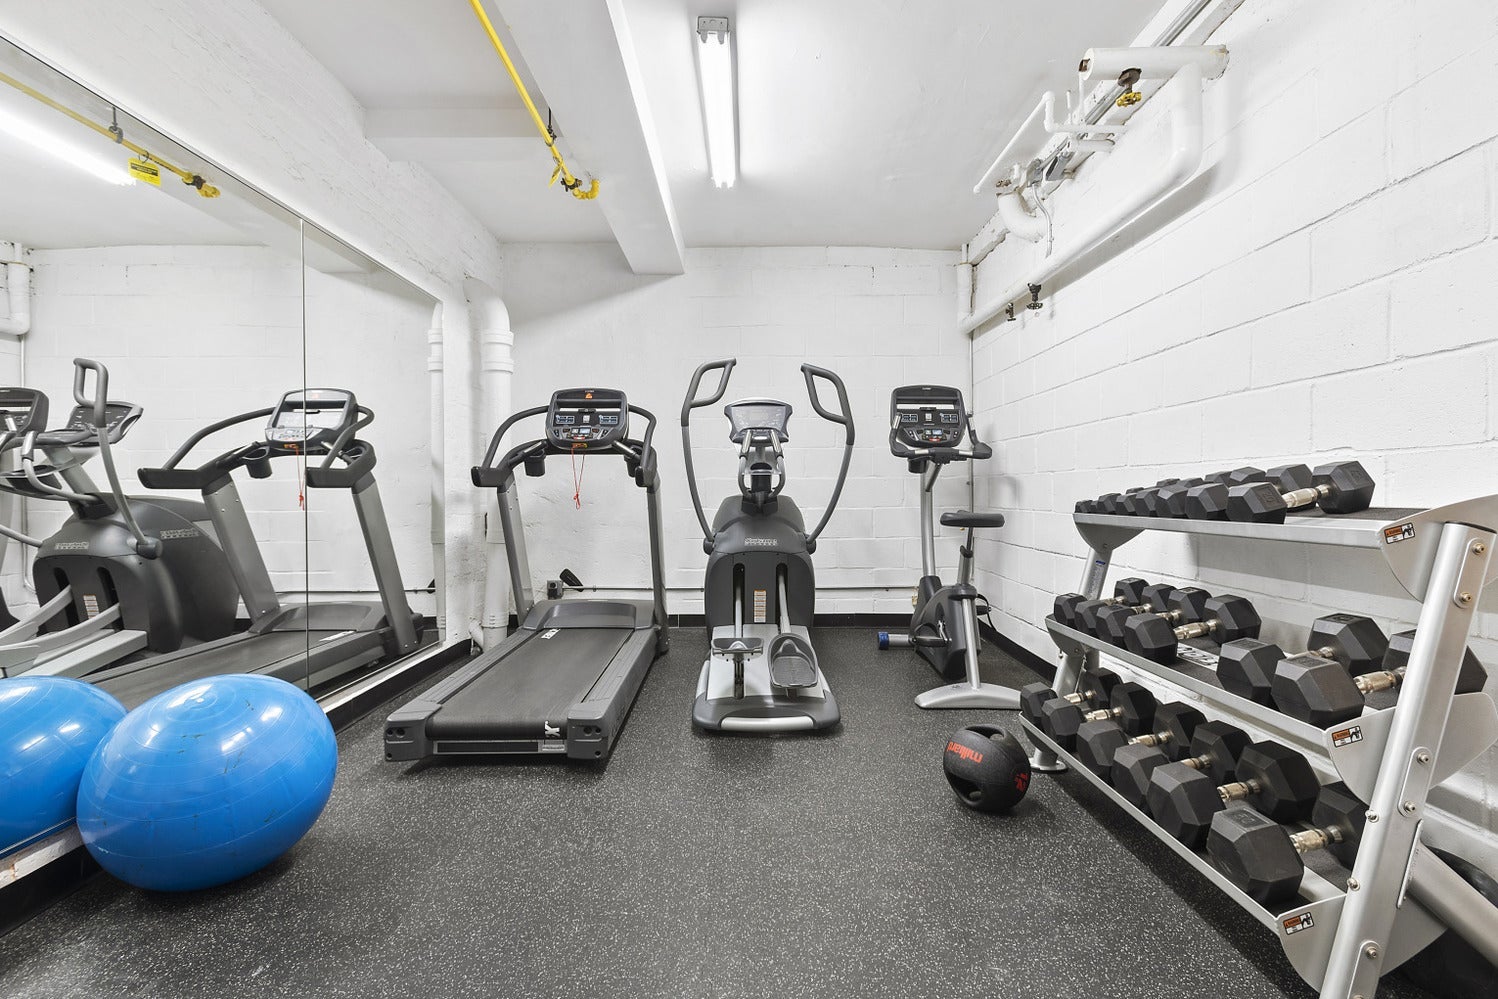 A small gym with weights, a treadmill, an exercise bike, and a stair climber